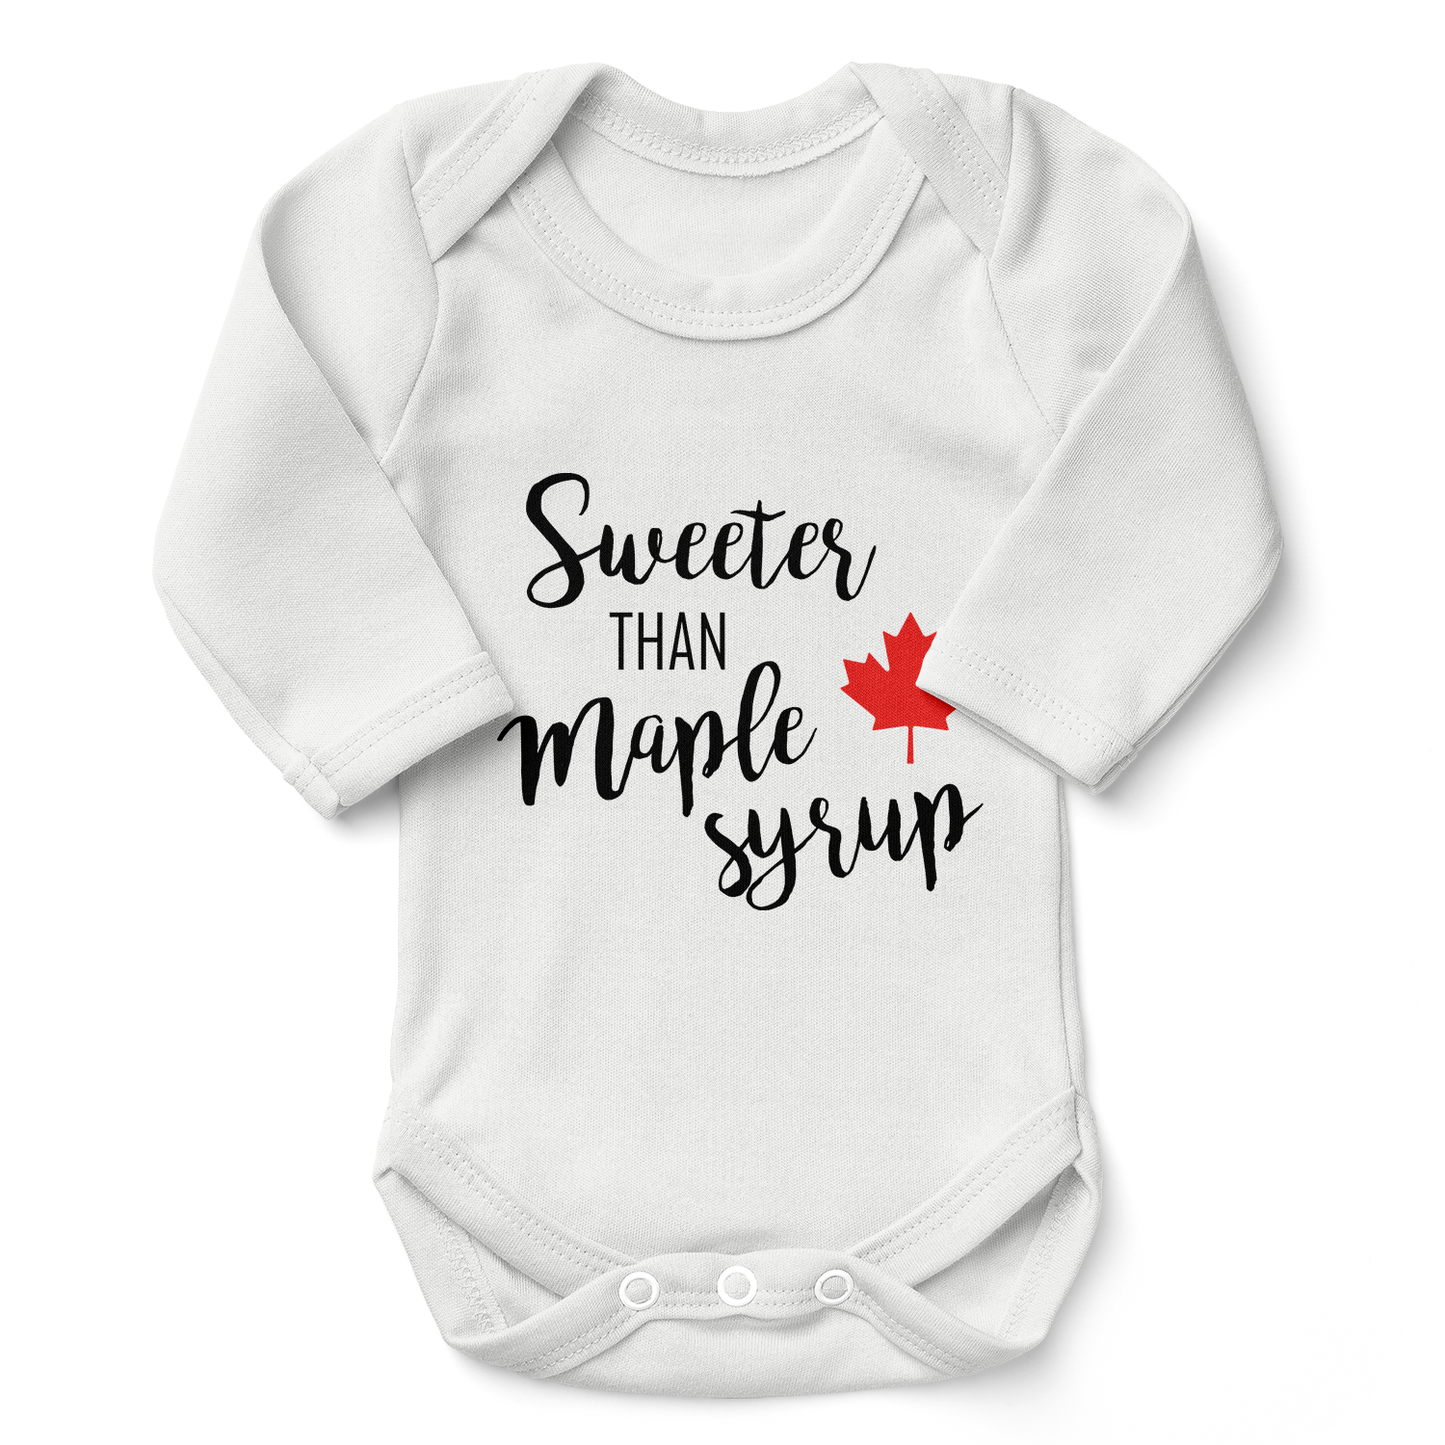 Endanzoo Organic Baby Bodysuit - Sweeter than Canada Maple Syrup